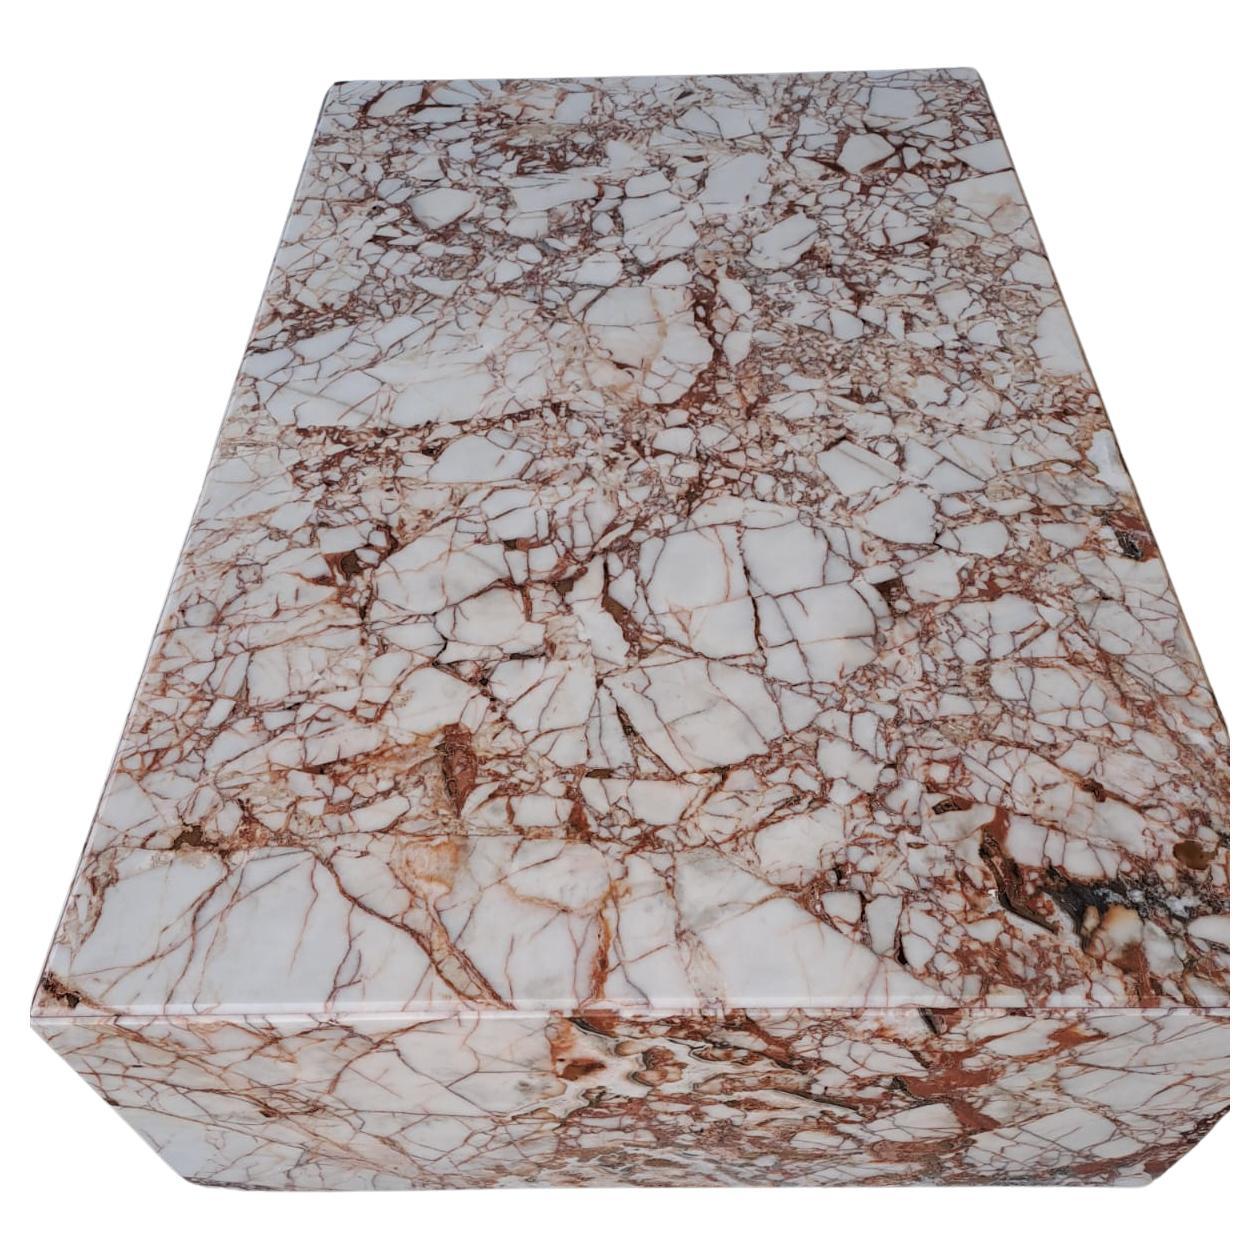 Introducing a masterpiece of design and nature's beauty, our Calacatta Viola Marble Coffee Table is a true testament to elegance and craftsmanship. This exquisite table effortlessly combines the serene purity of Calacatta Viola marble with a unique